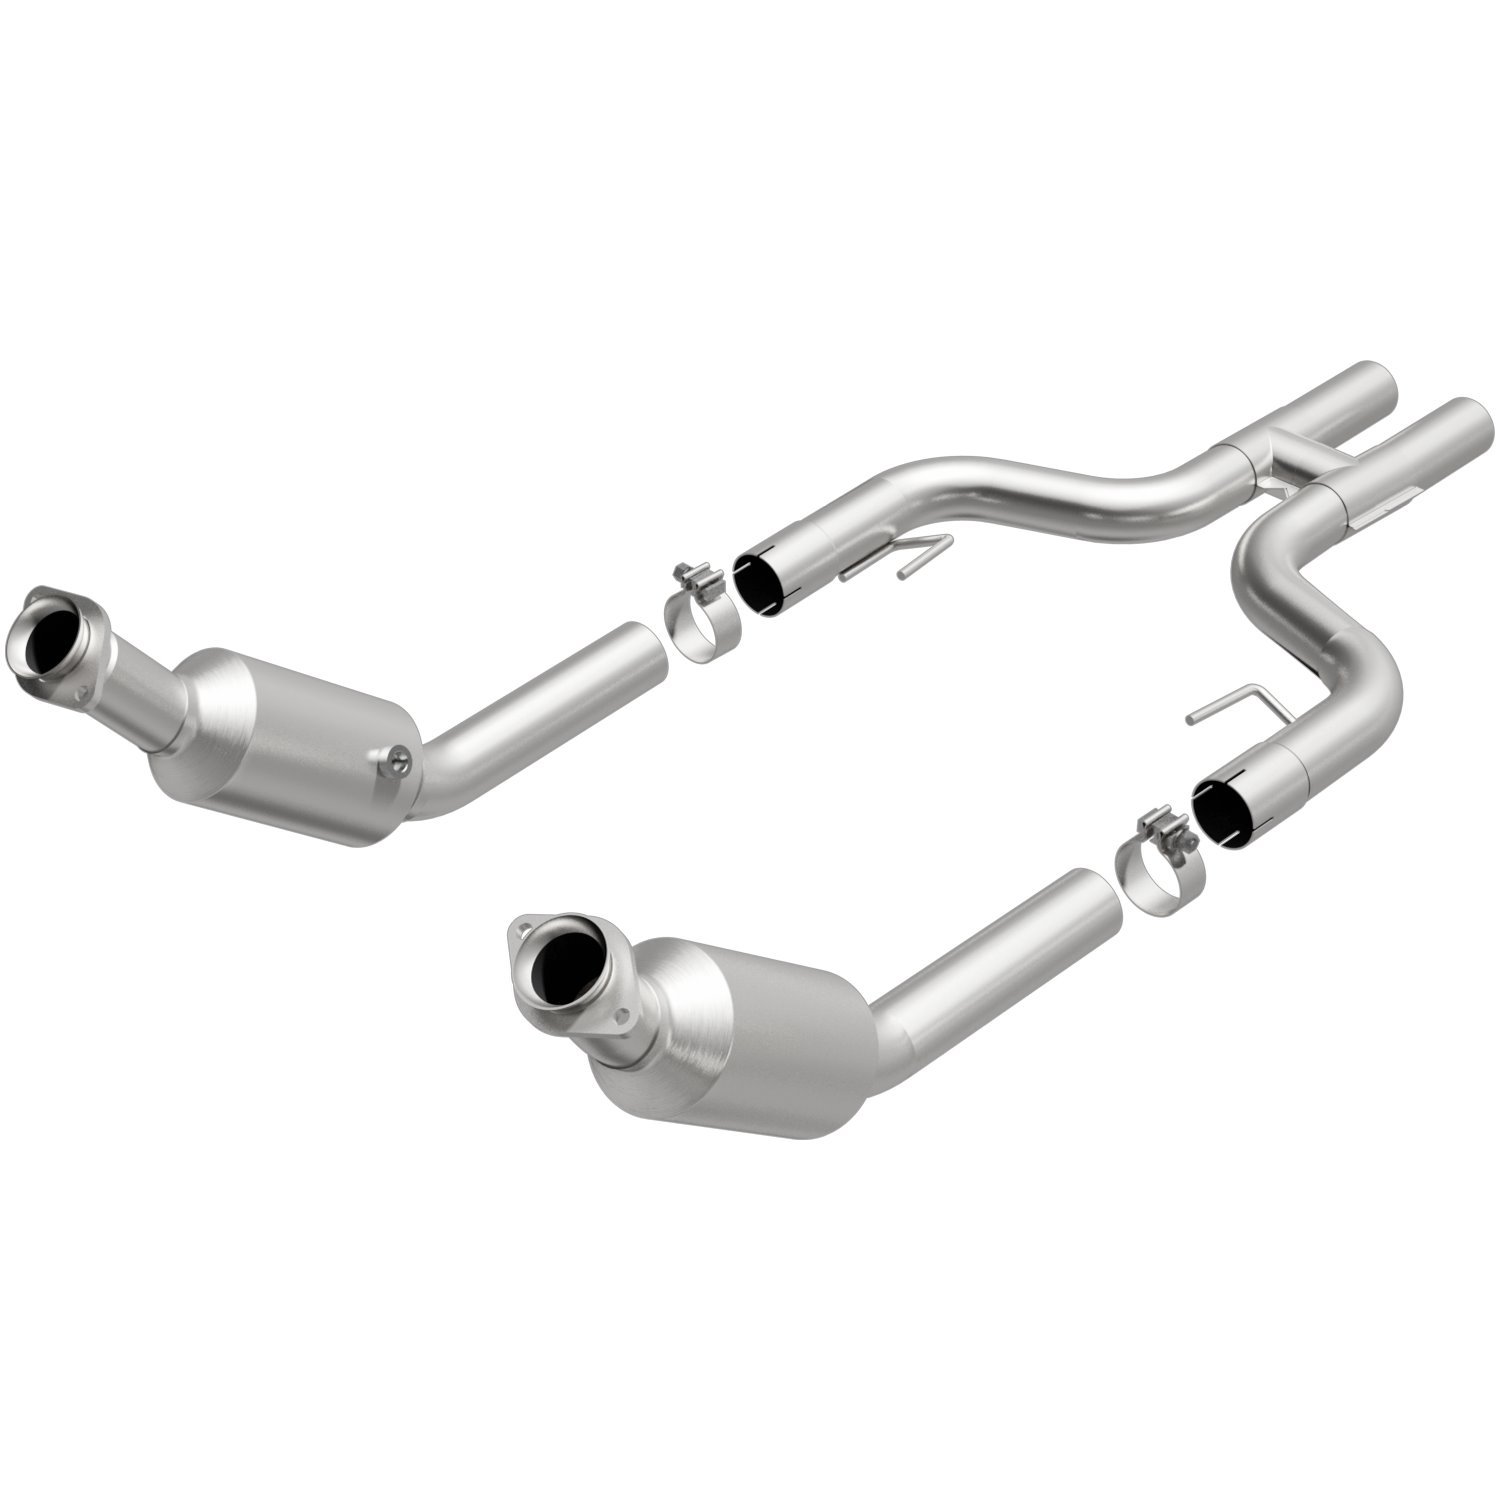 2005-2010 Ford Mustang HM Grade Federal / EPA Compliant Direct-Fit Catalytic Converter